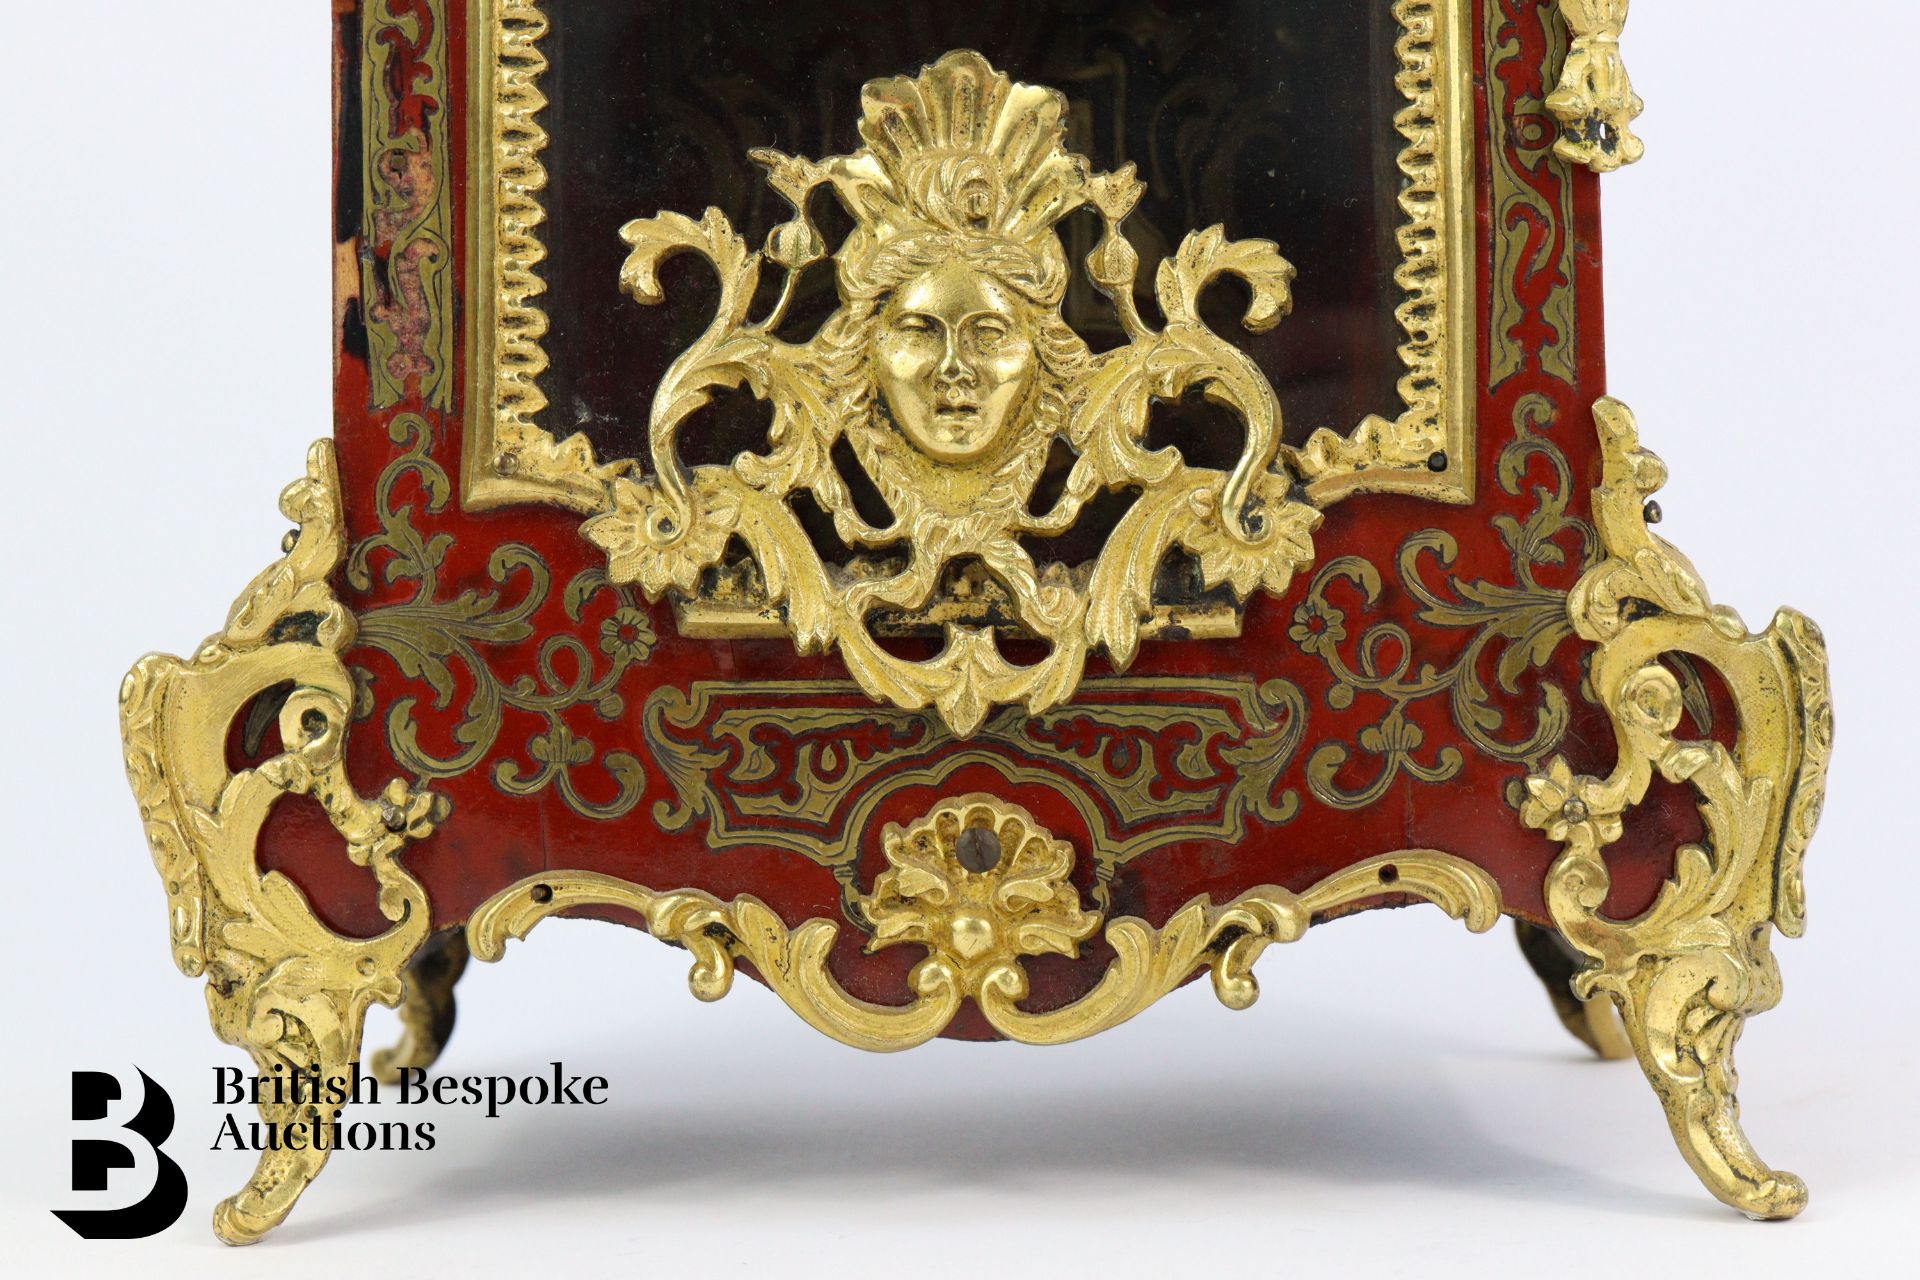 French Boulle Mantel Clock - Image 4 of 9